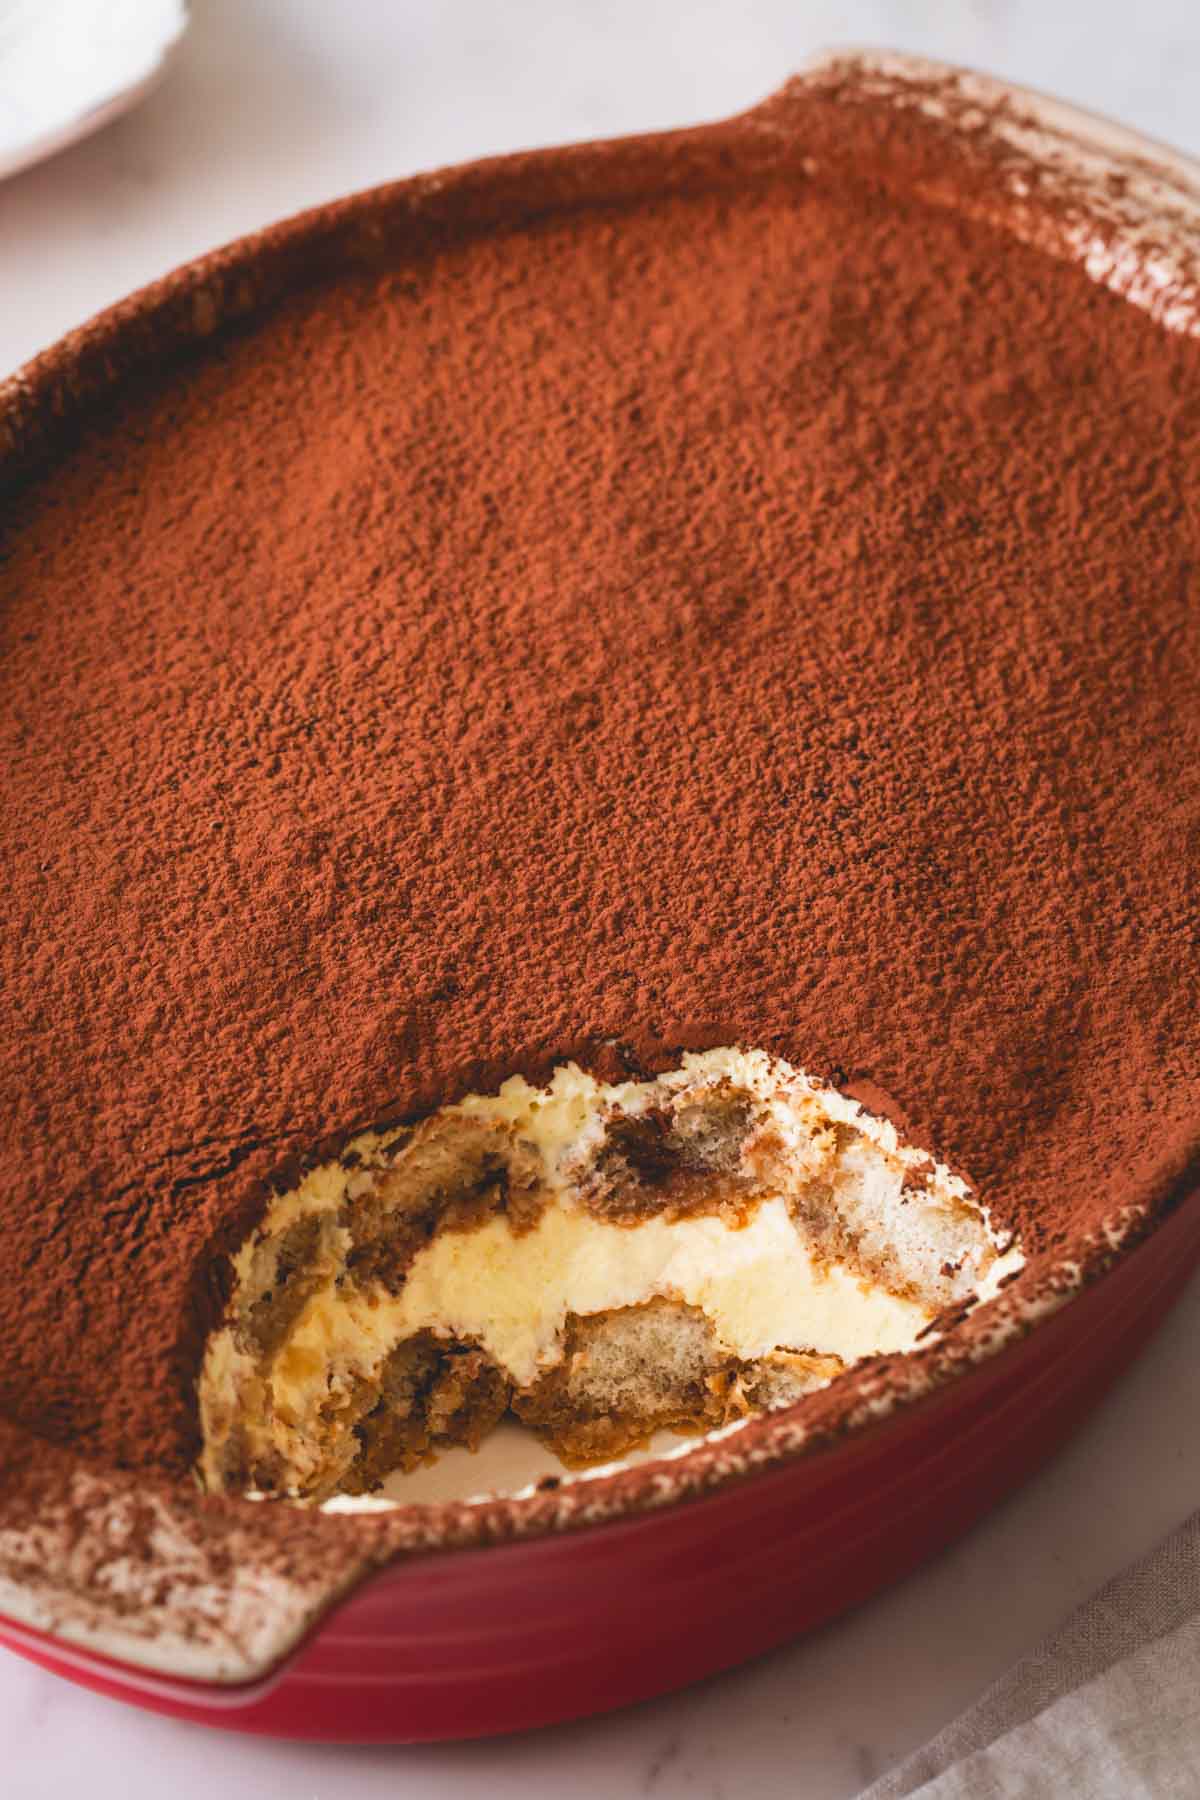 A dish of tiramisu with a serving missing.